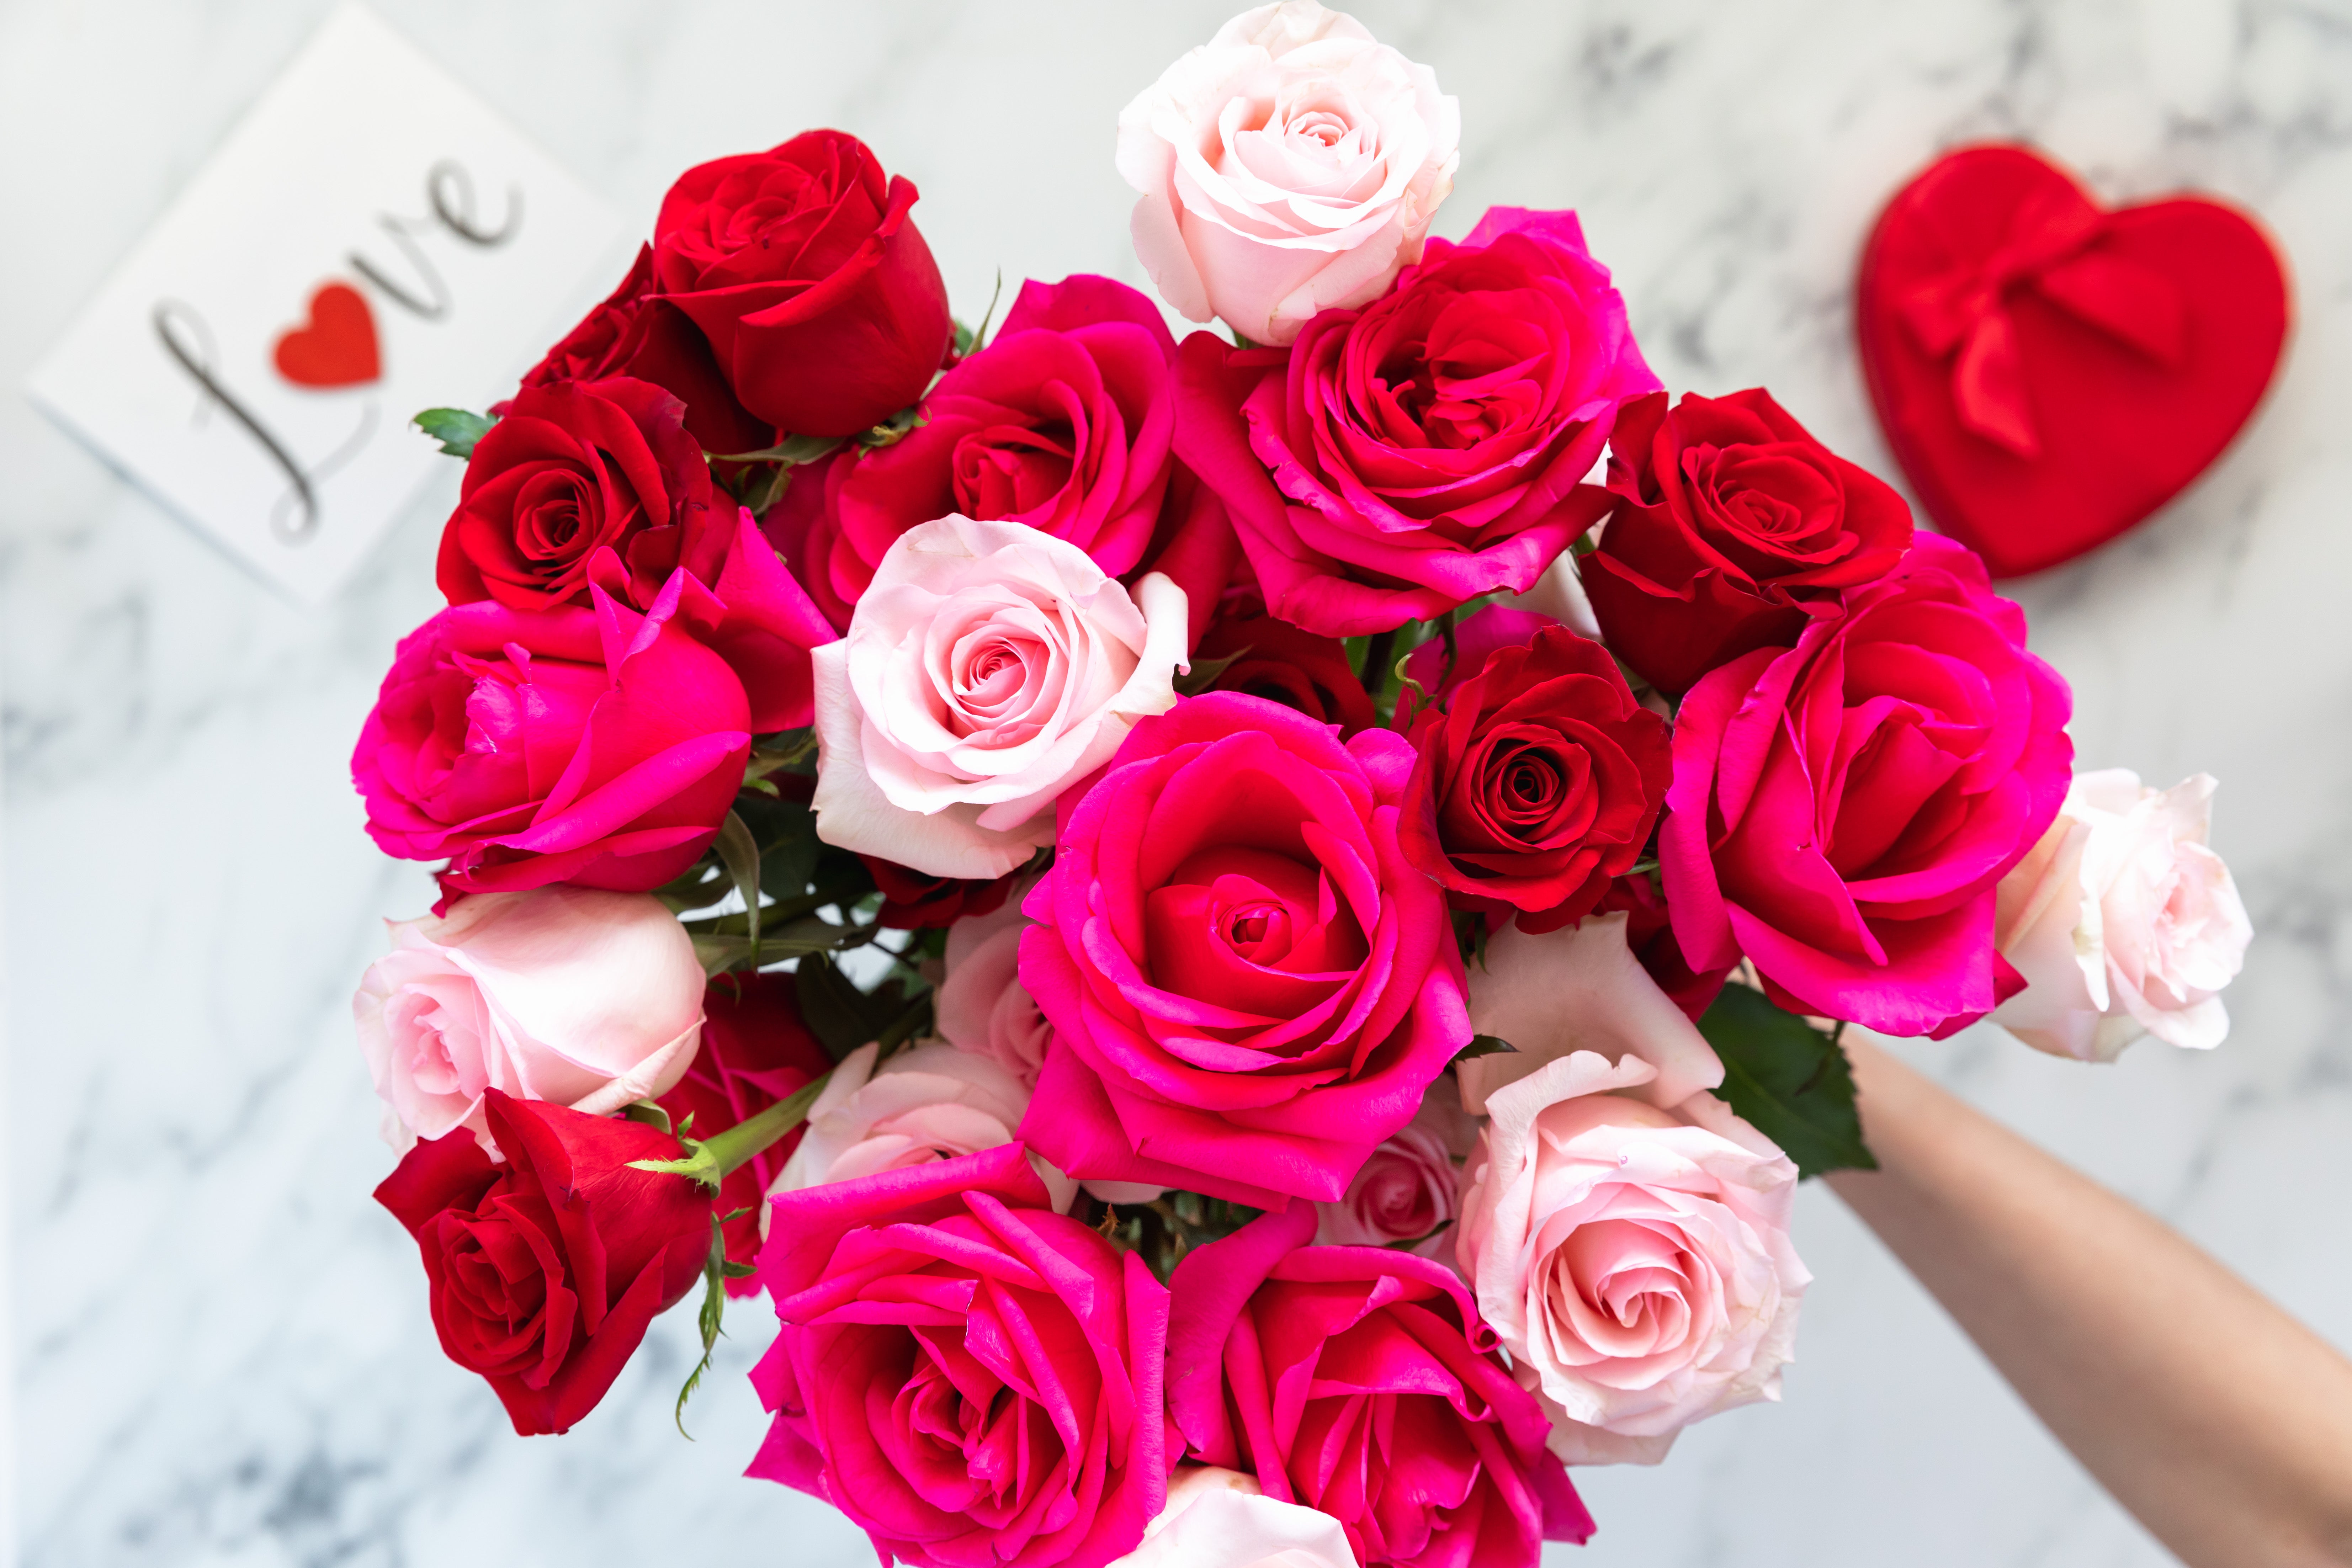 ### Pink Roses ###